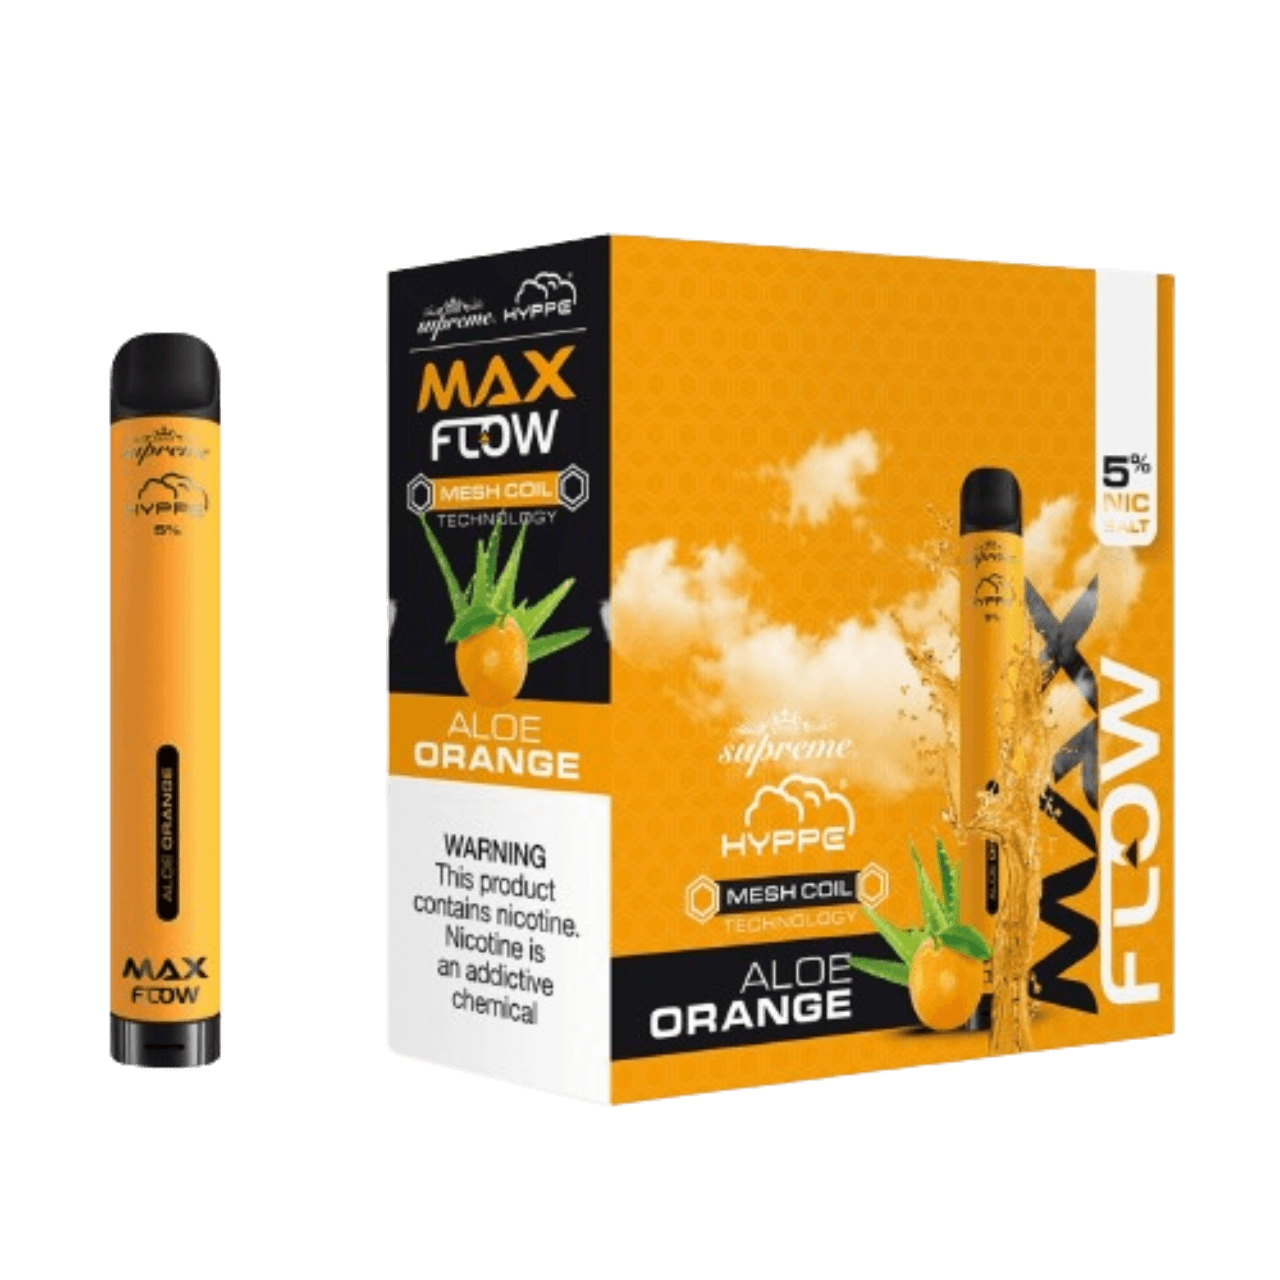 HYPPE MAX Flow Mesh 2000 Puff Disposable